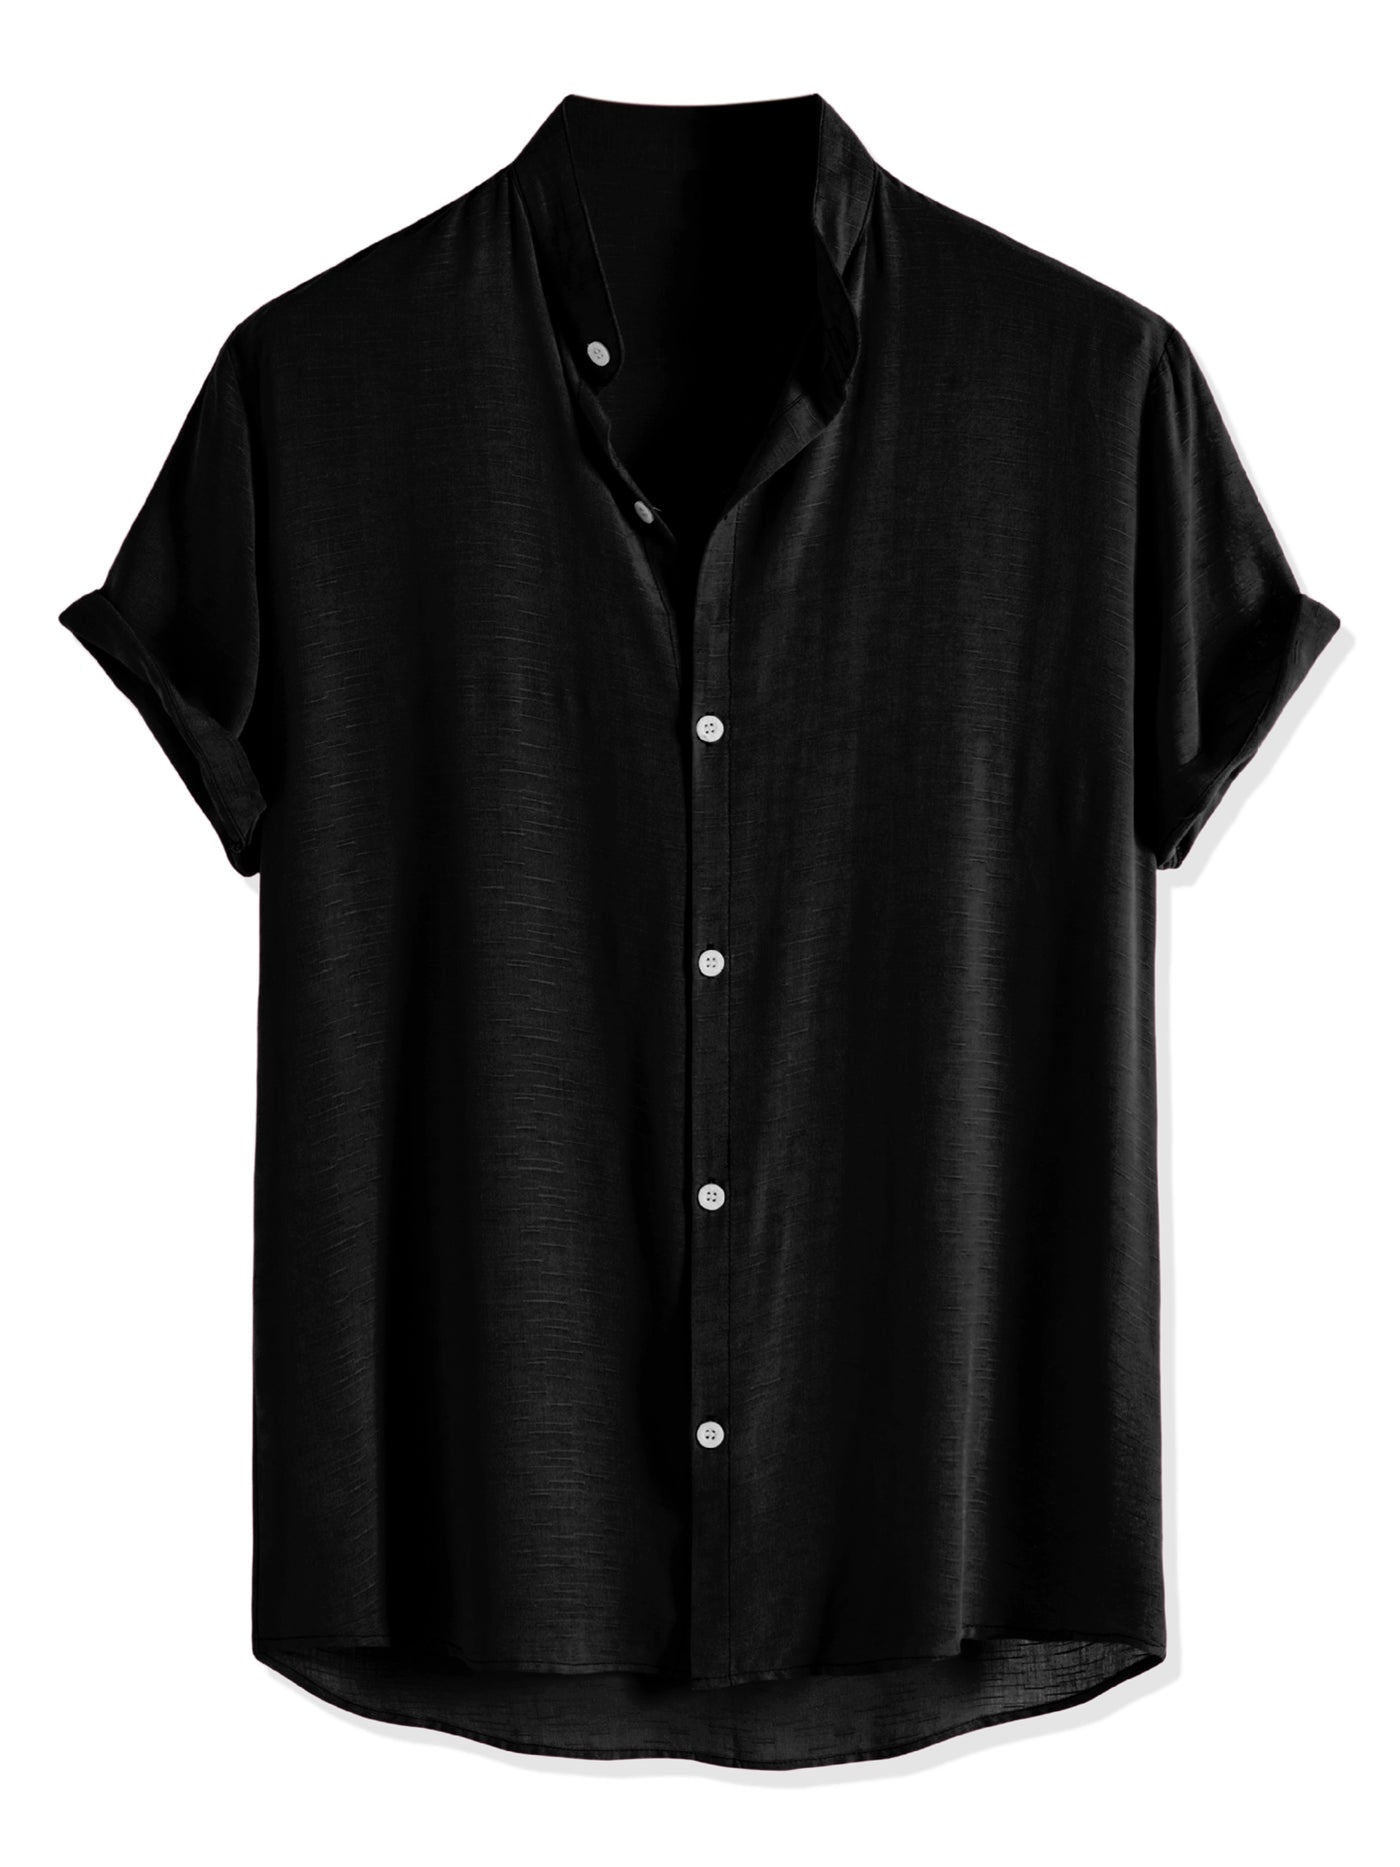 Bublédon Linen Banded Collar Short Sleeve Button Solid Shirts